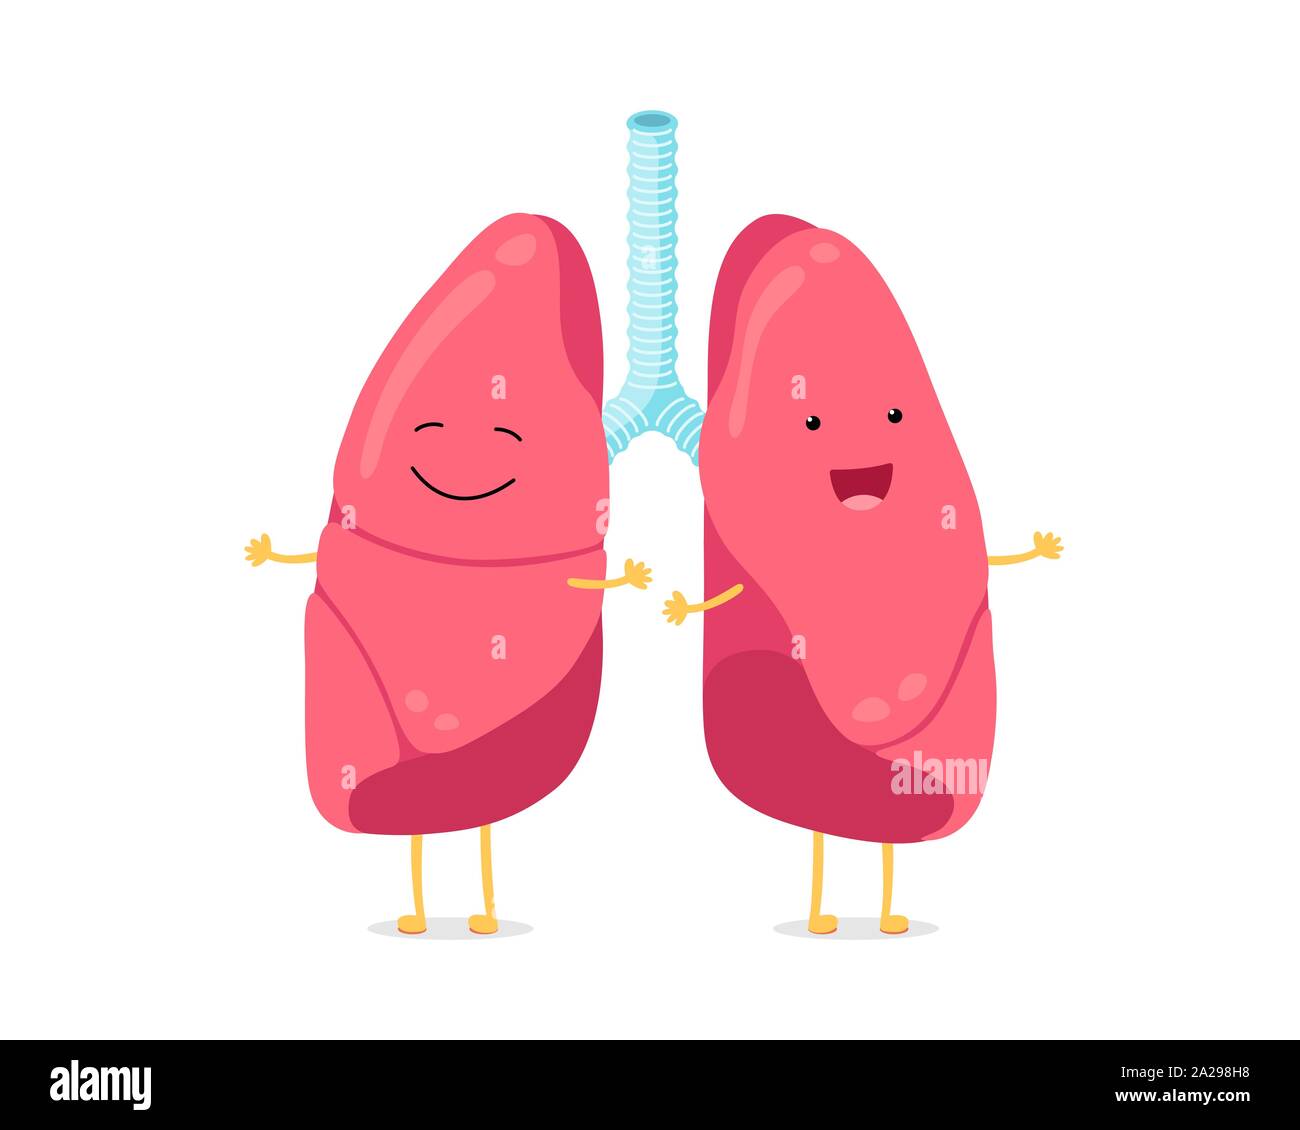 Cute cartoon funny lungs character. Strong smiling lung. Human respiratory system happy internal organ mascot. Medical healthy anatomy flat vector illusrtation Stock Vector